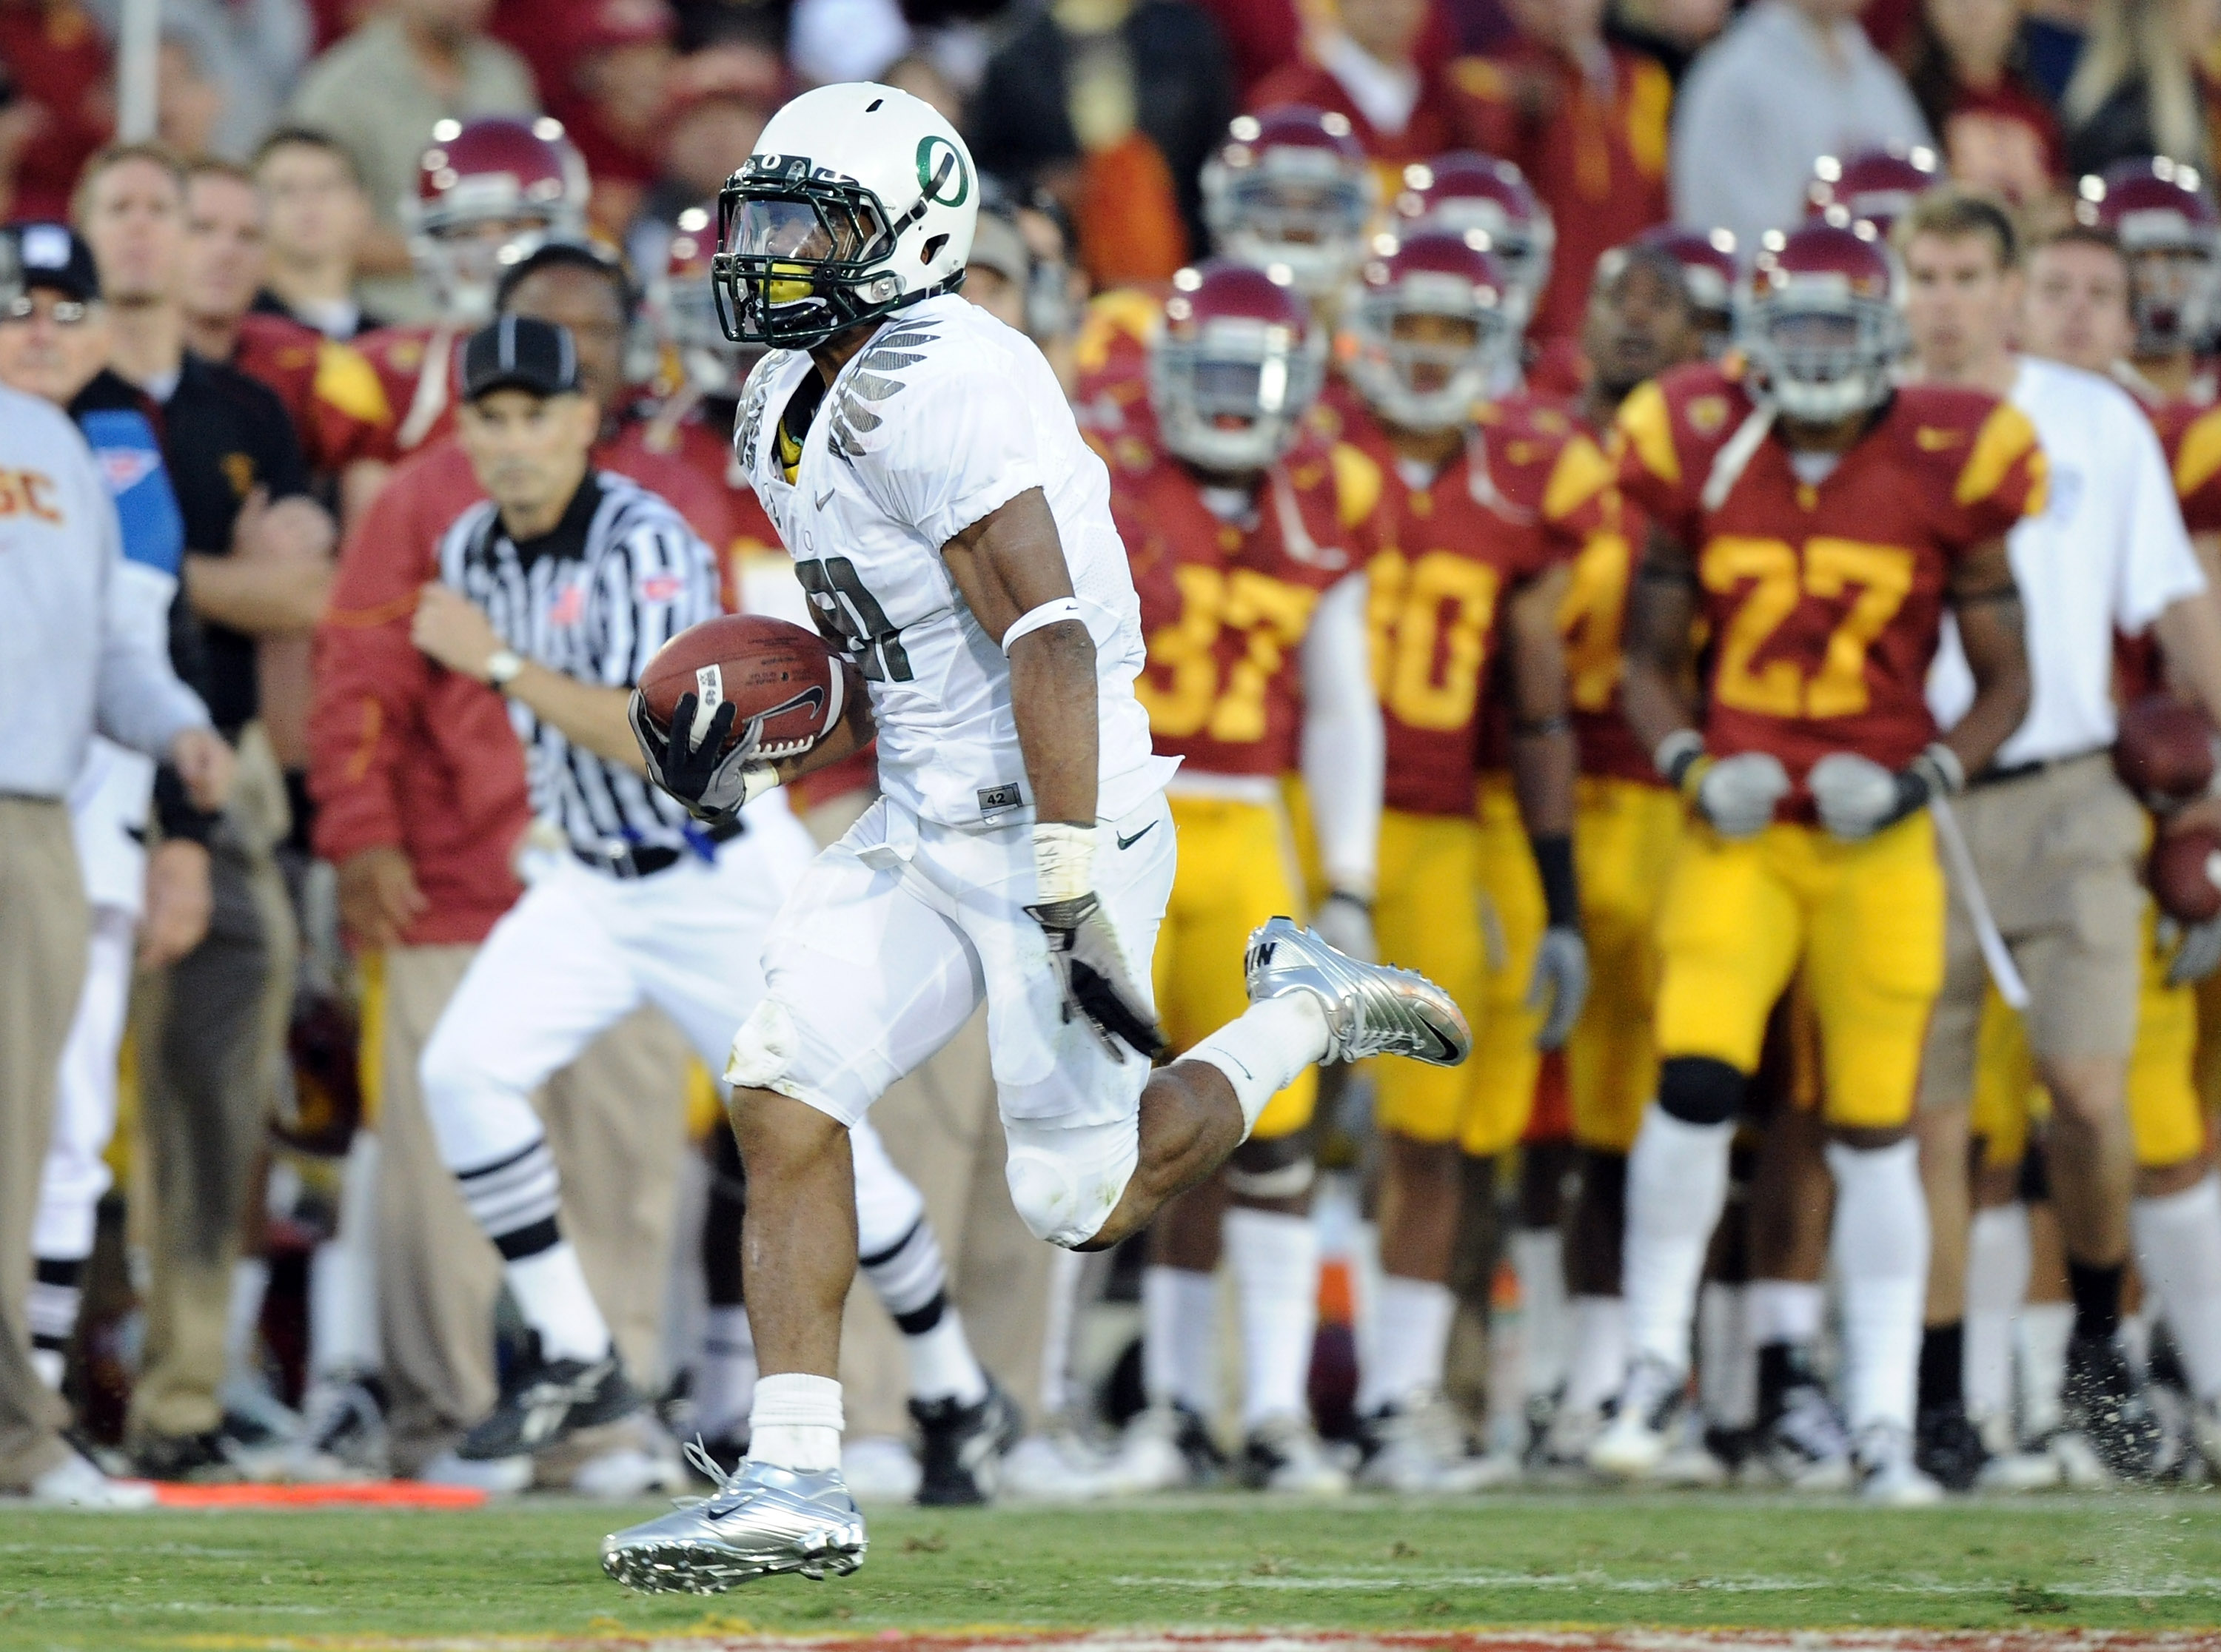 LOS ANGELES, CA - OCTOBER 30:  LaMichael James #21 of the Oregon Ducks runs down the sidelines to score a touchdown for a 15-10 lead over the USC Trojans at Los Angeles Memorial Coliseum on October 30, 2010 in Los Angeles, California.  (Photo by Harry How